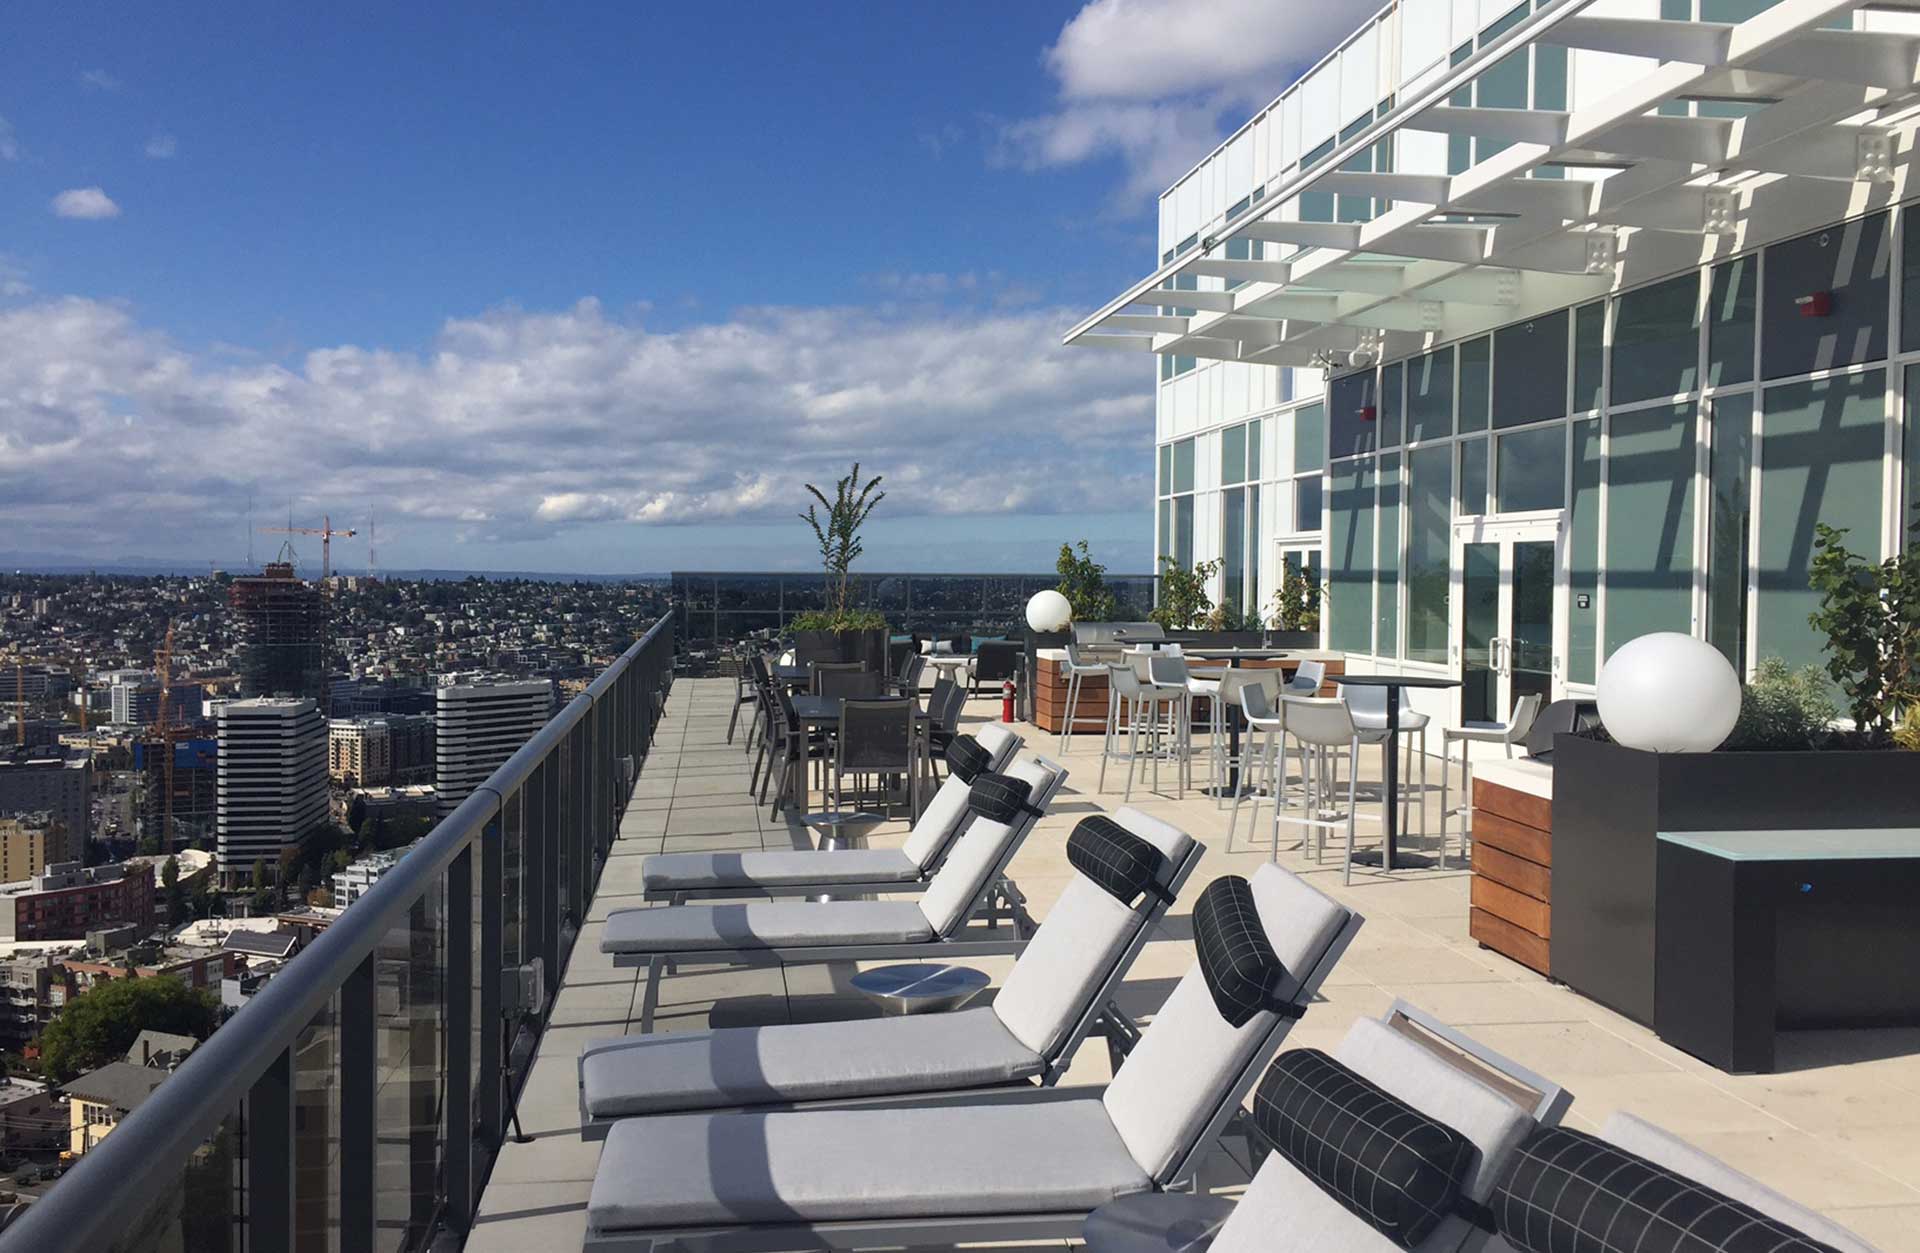 Luma Condominiums roof seating with view of Seattle skyline